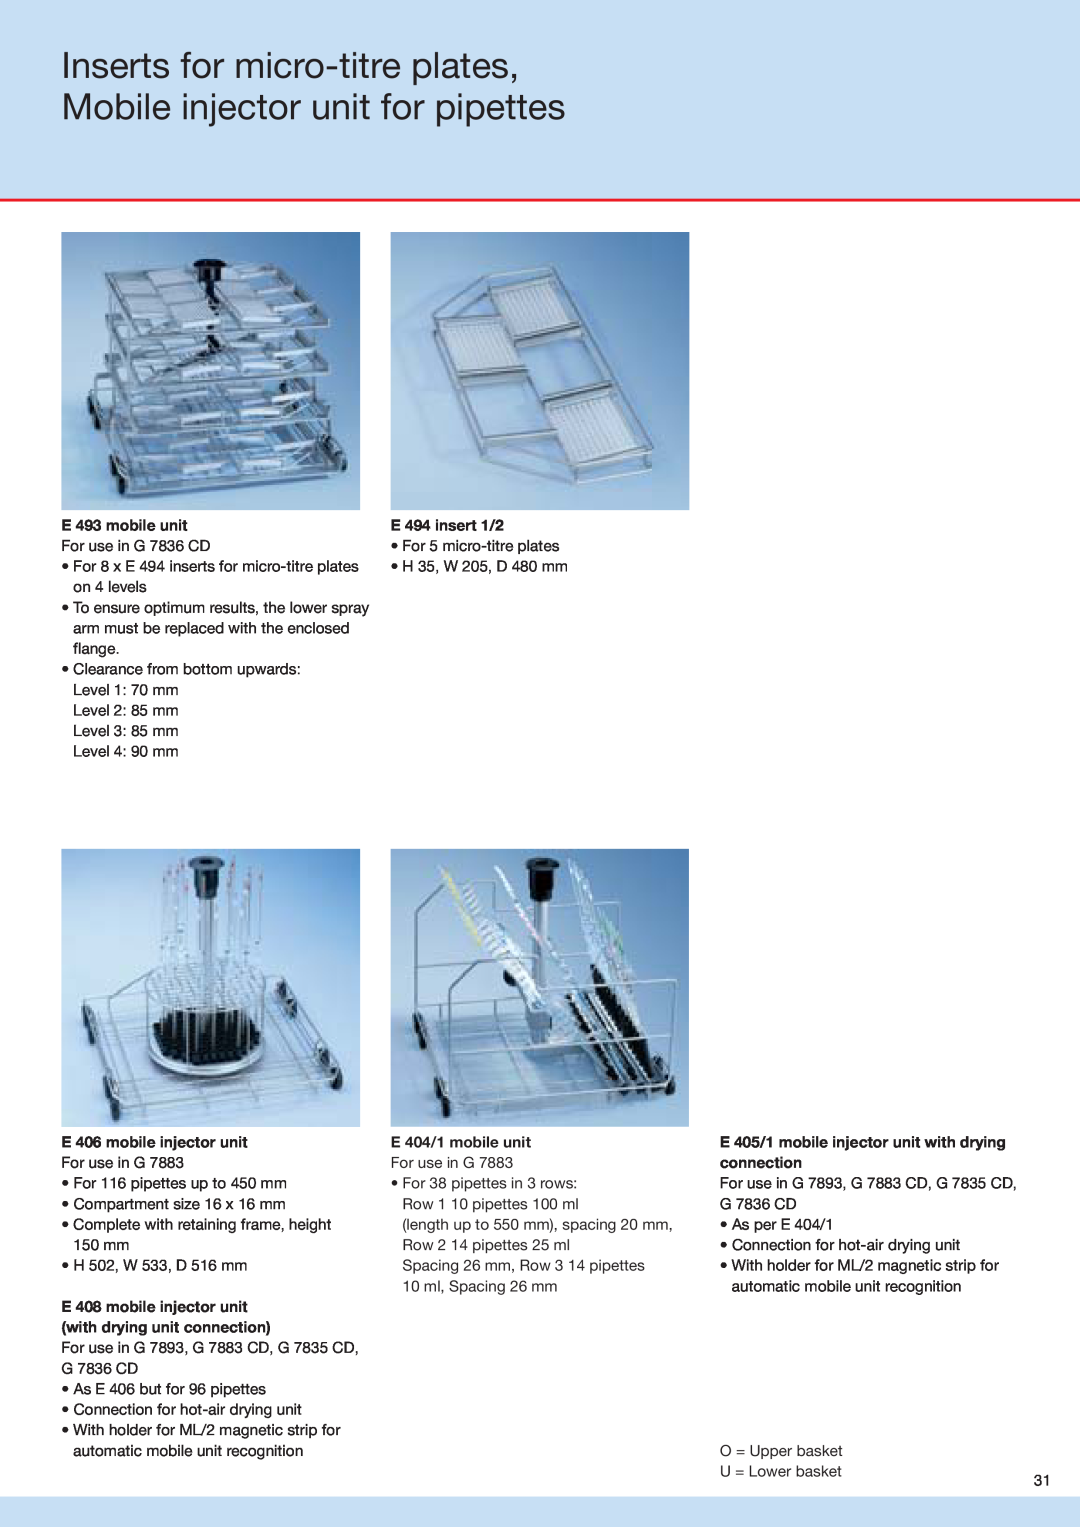 Miele G 7836, G 7883 Inserts for micro-titreplates, Mobile injector unit for pipettes, E 493 mobile unit, E 494 insert 1/2 